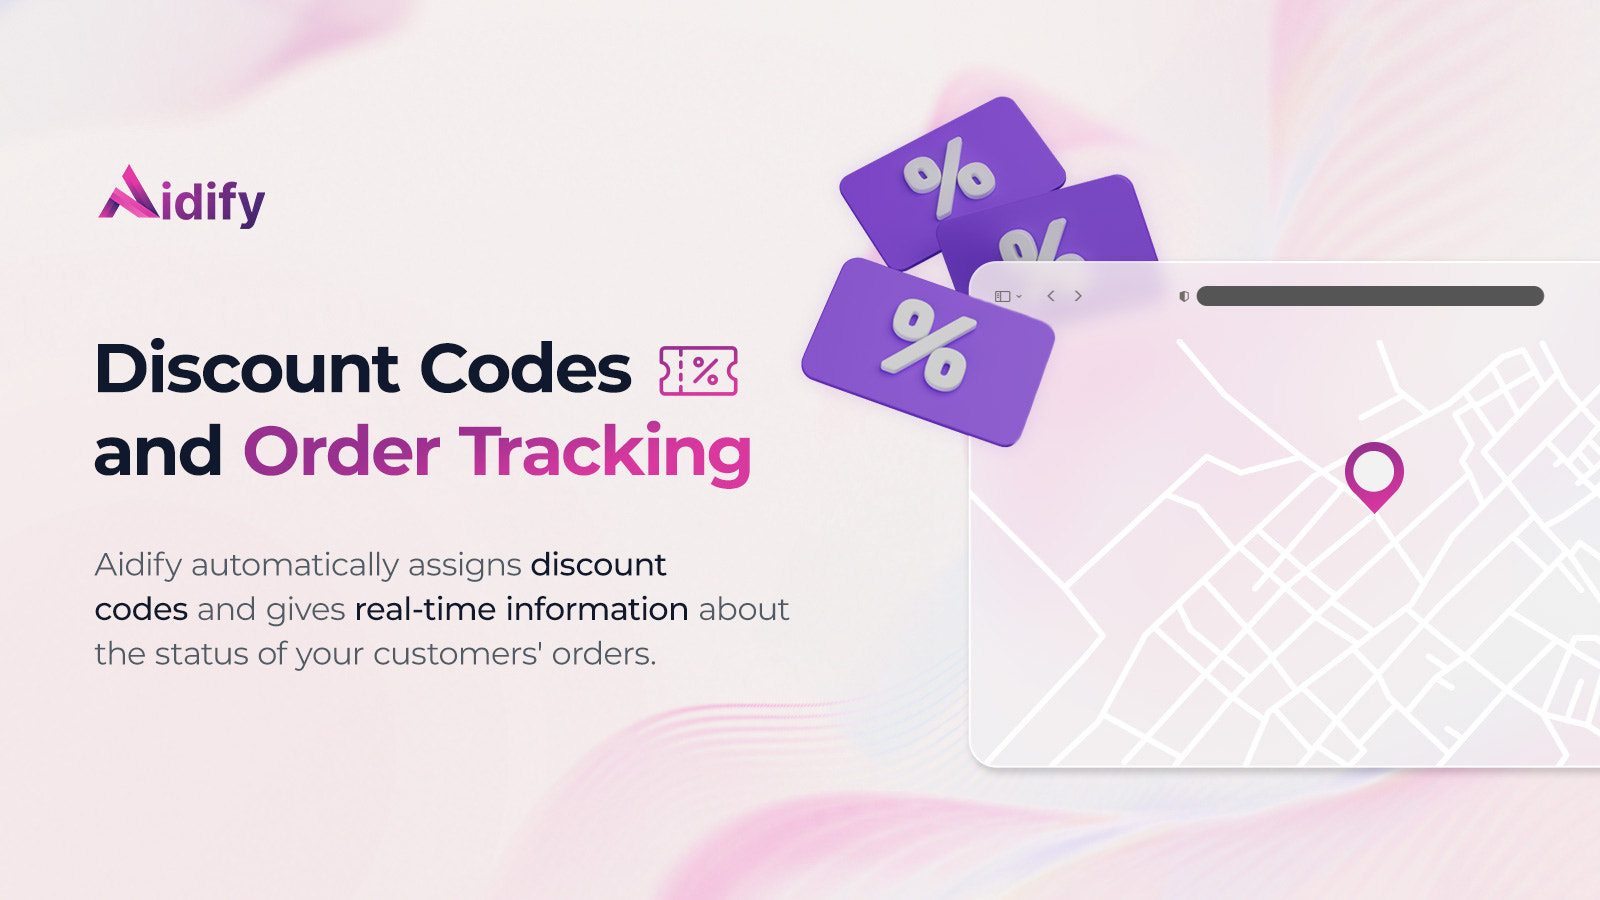 Assigns discount codes and order trackings directly in the chat